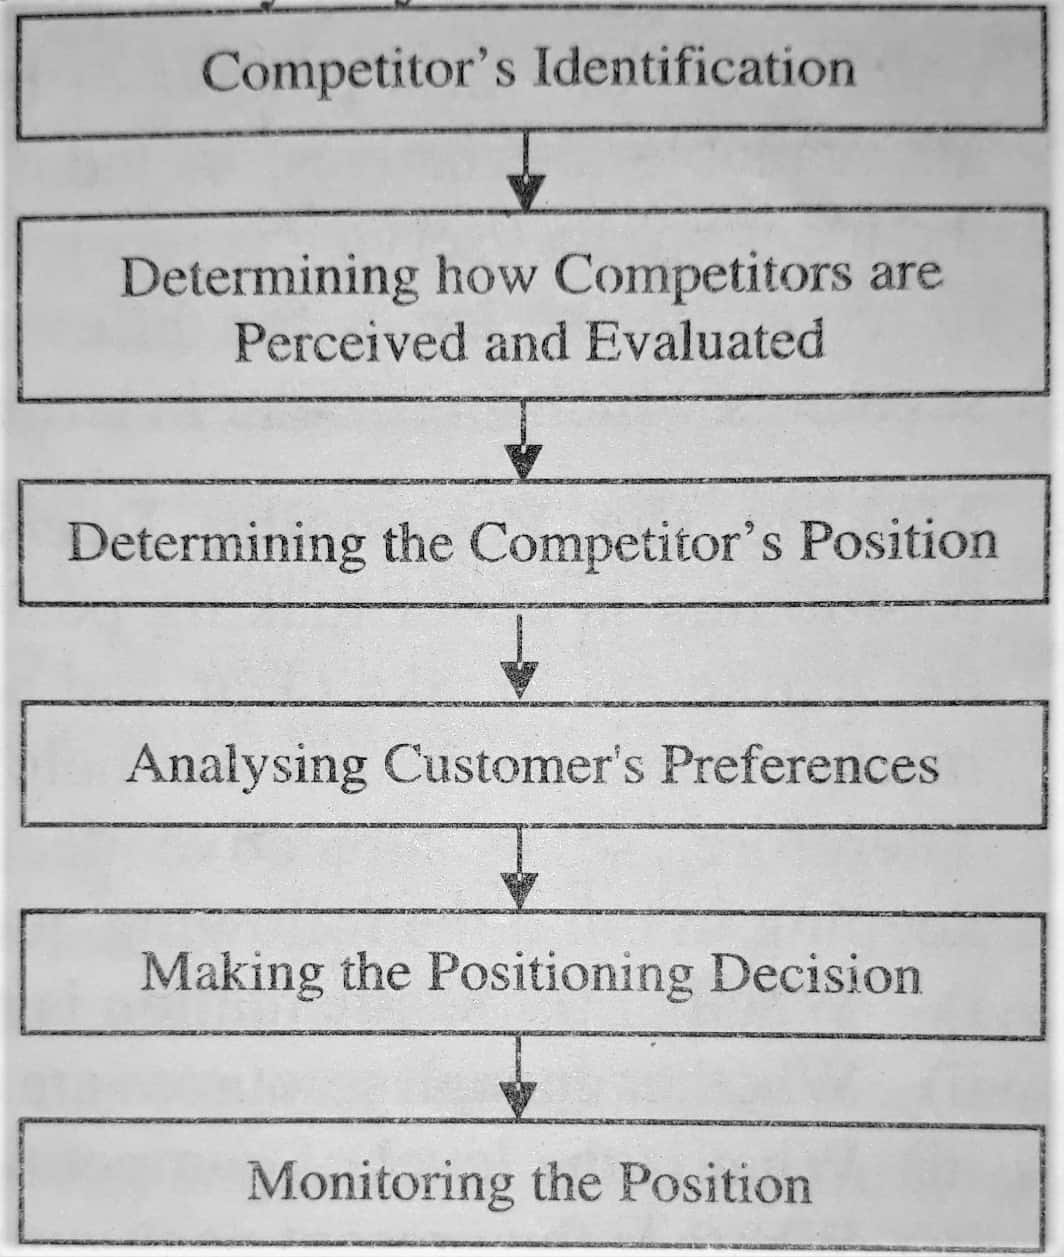 Steps in Developing a Positioning Strategy